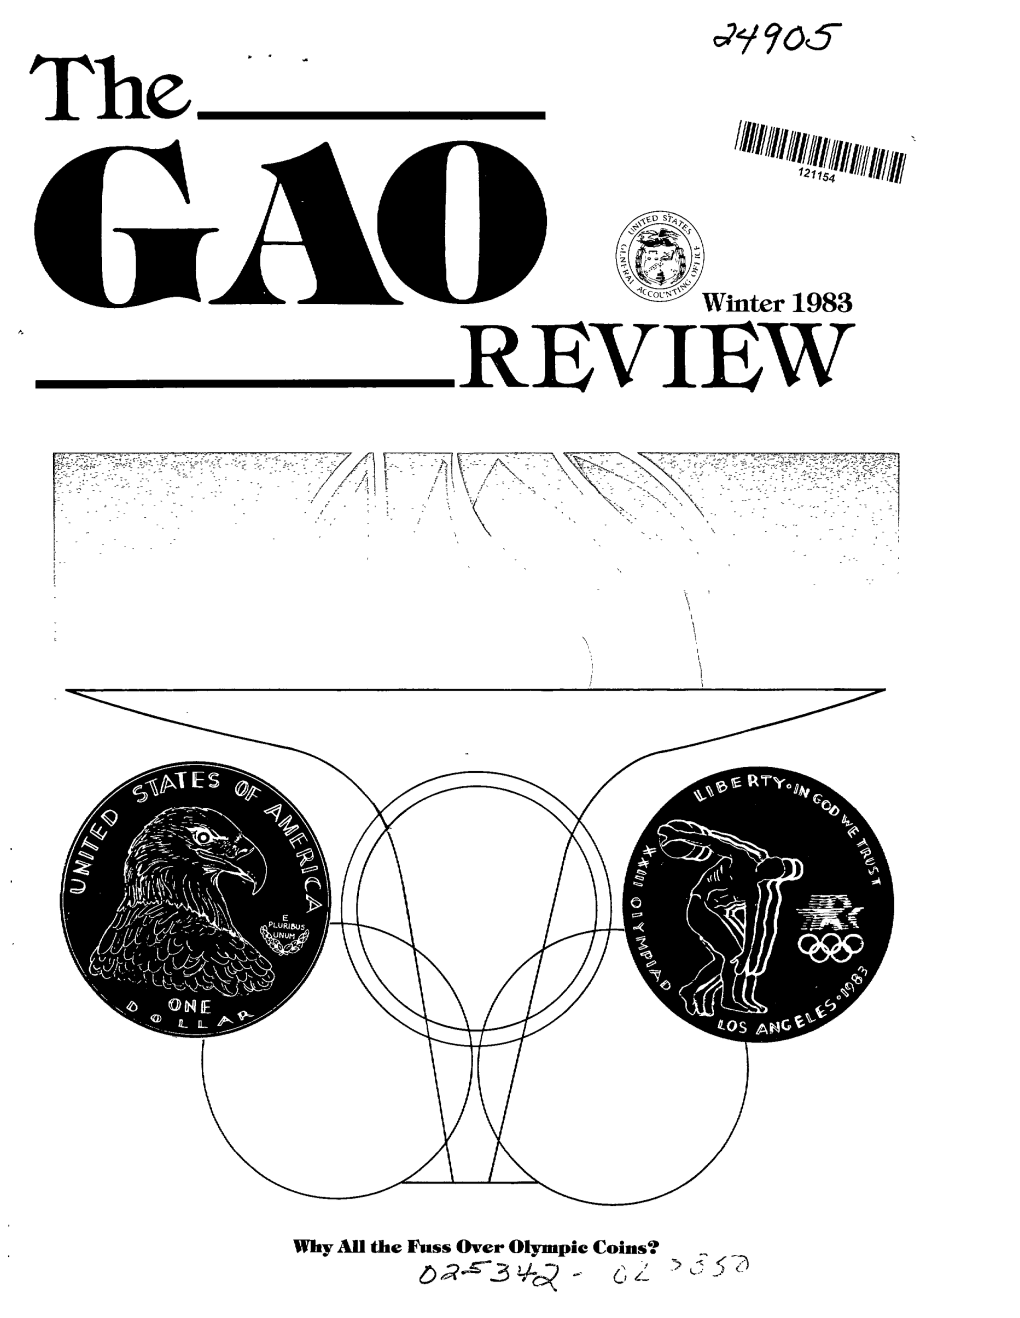 The GAO Review, Vol. 18, Issue 1, Winter 1983